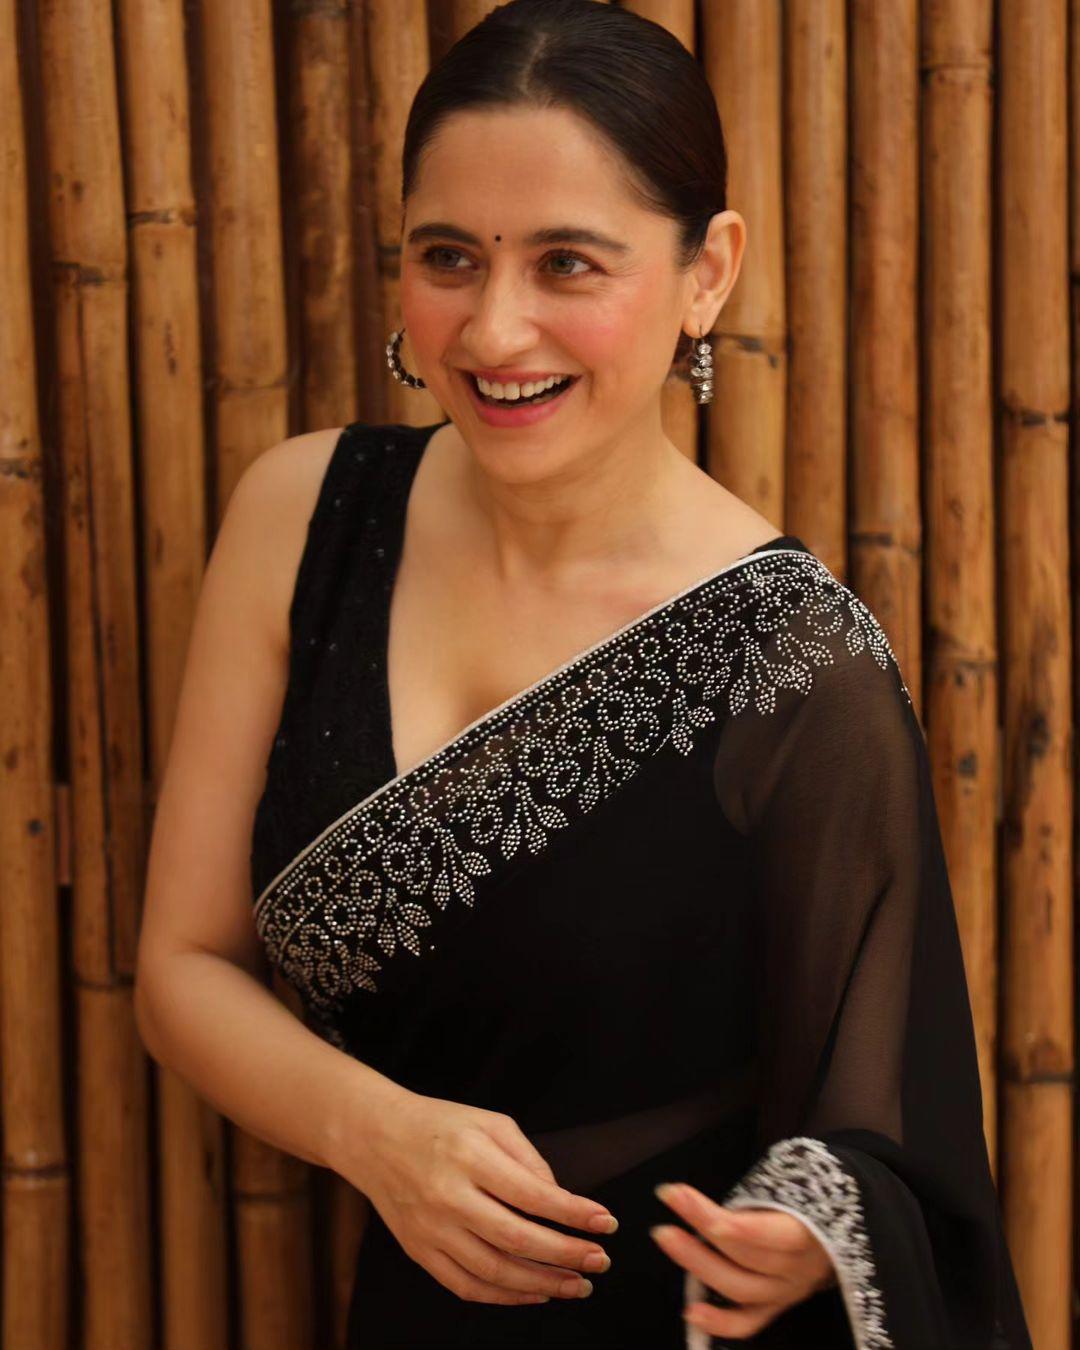 In her Heeramandi appearance, the actress completes her outfit with a simple black sleeveless blouse featuring a deep V-neckline.